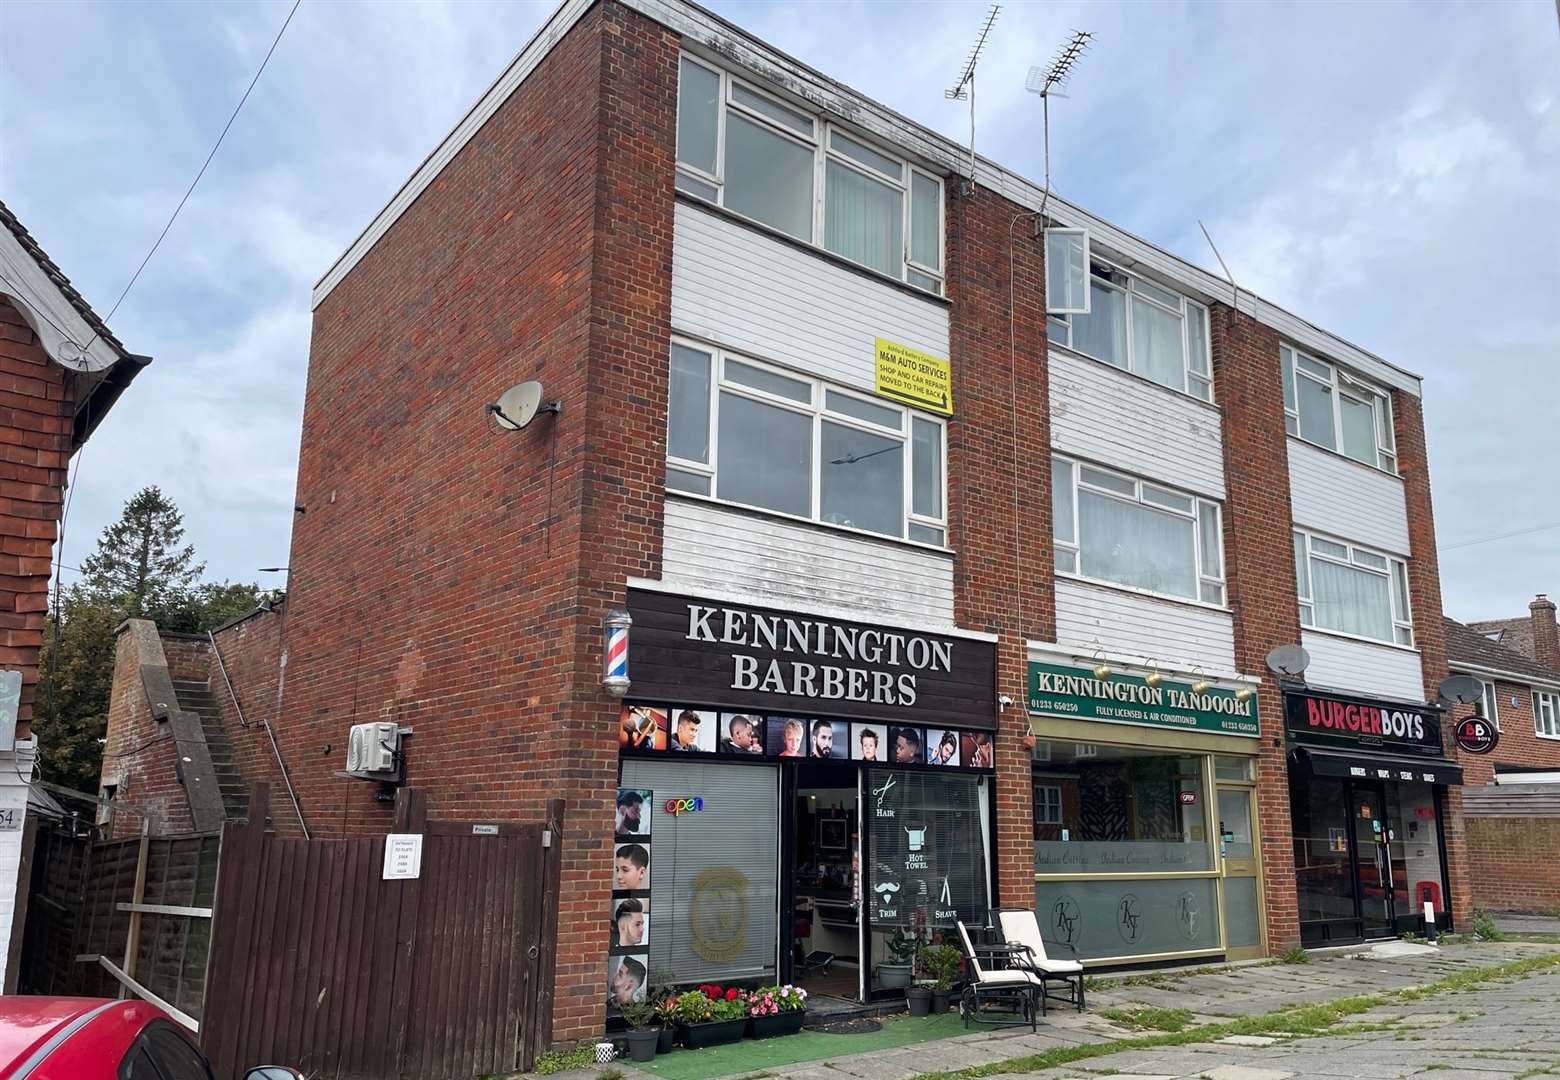 This property at 156 Faversham Road in Ashford recently went for £256,500 at the penultimate online auction of the year by Clive Emson Land and Property Auctioneers.